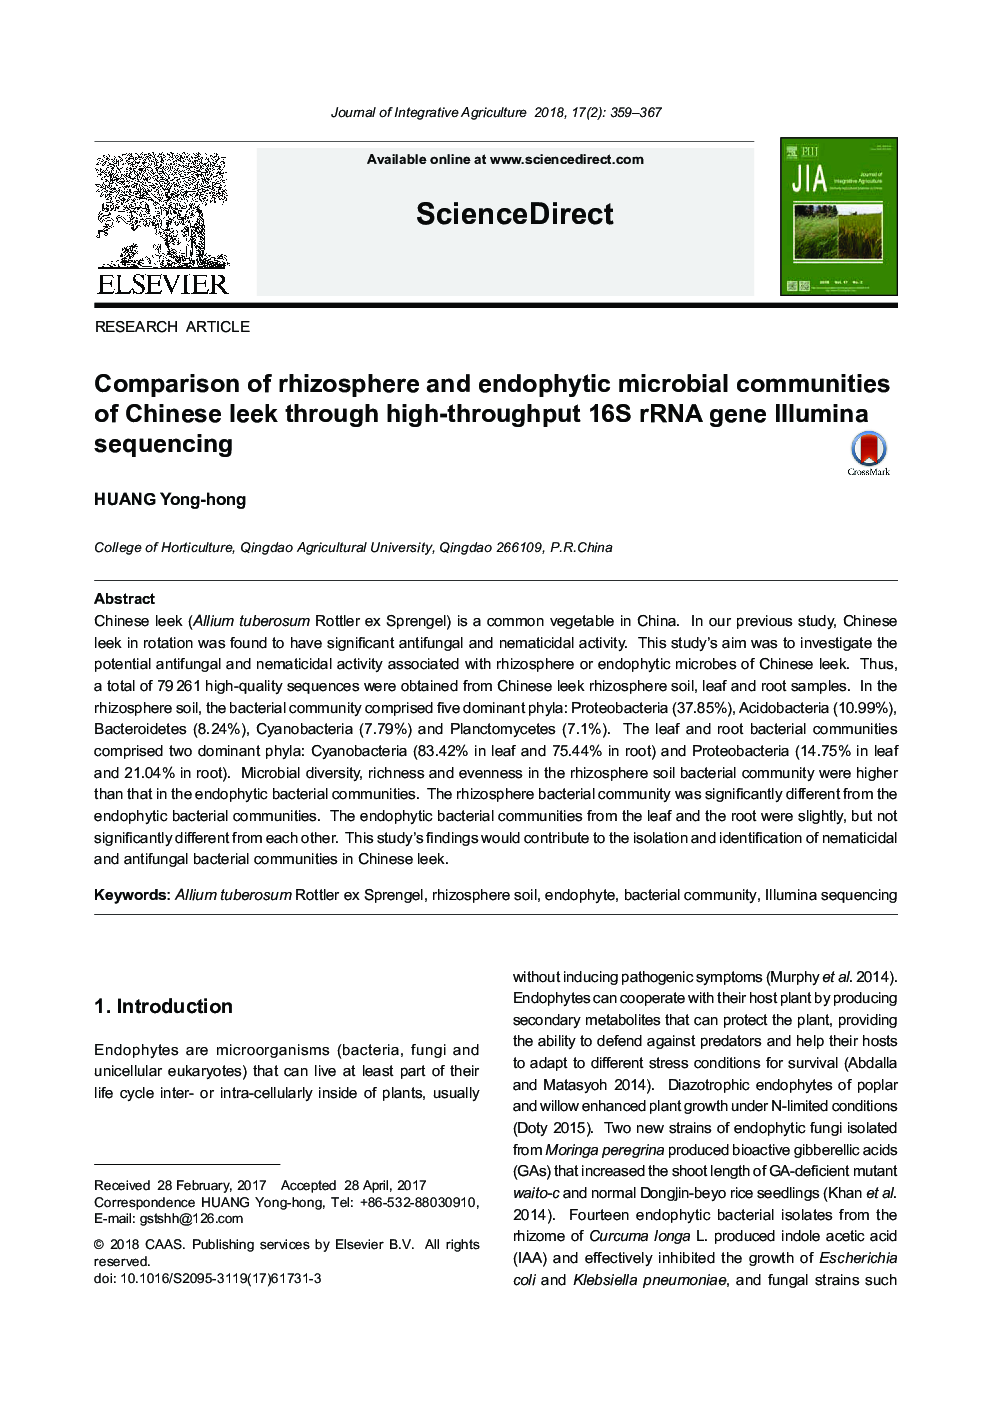 Comparison of rhizosphere and endophytic microbial communities of Chinese leek through high-throughput 16S rRNA gene Illumina sequencing